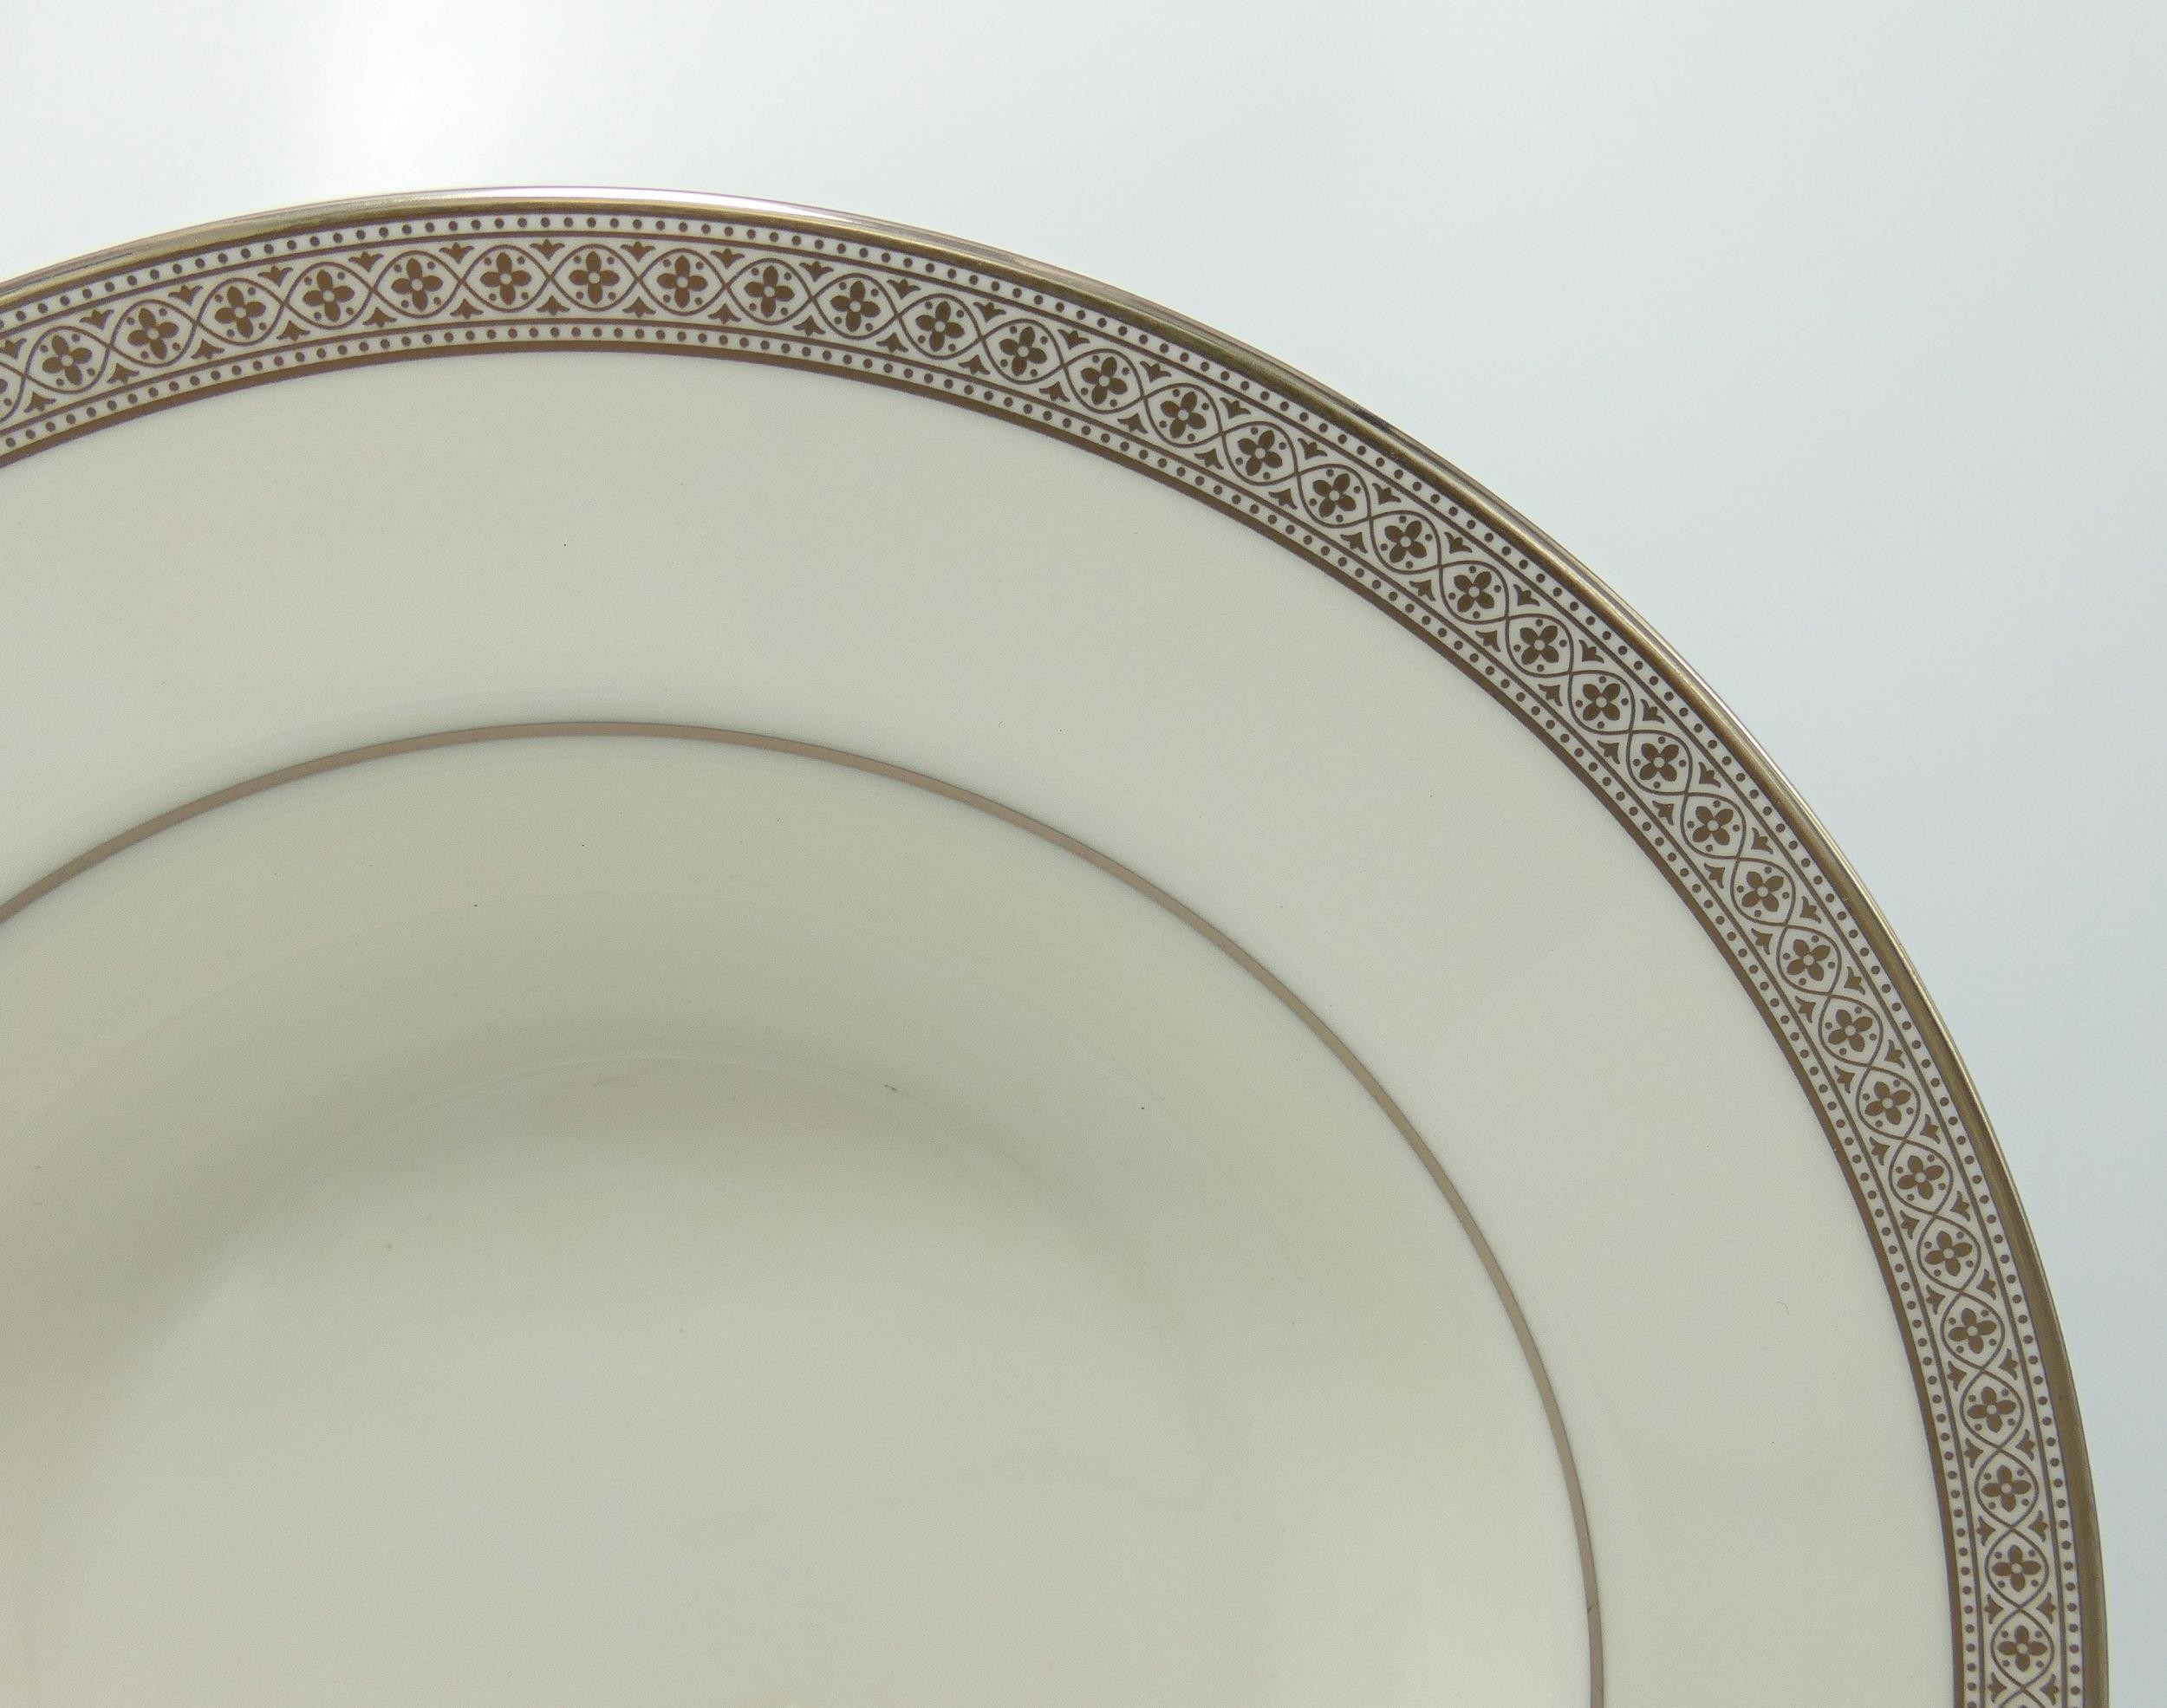 Royal Doulton Archives Piper Platinum patterned tea & dinner ware to include - cups & saucers x 46